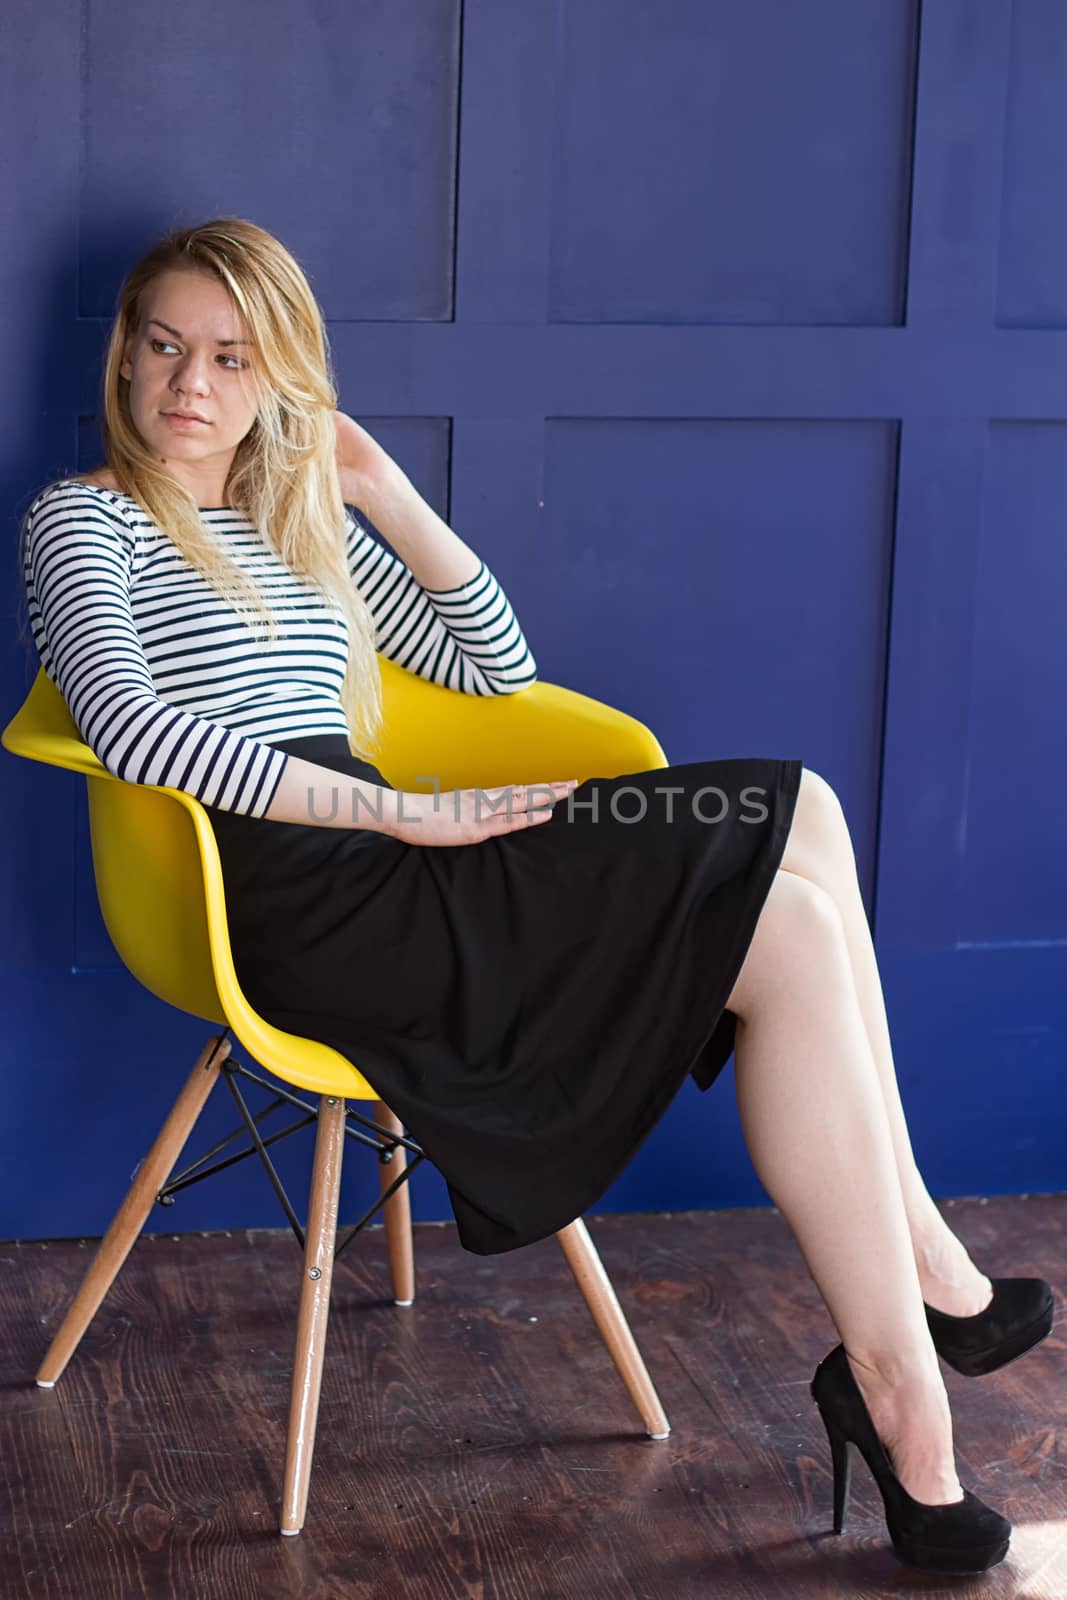 Blond girl in a long skirt and a vest sits on a chair next to the blue walls